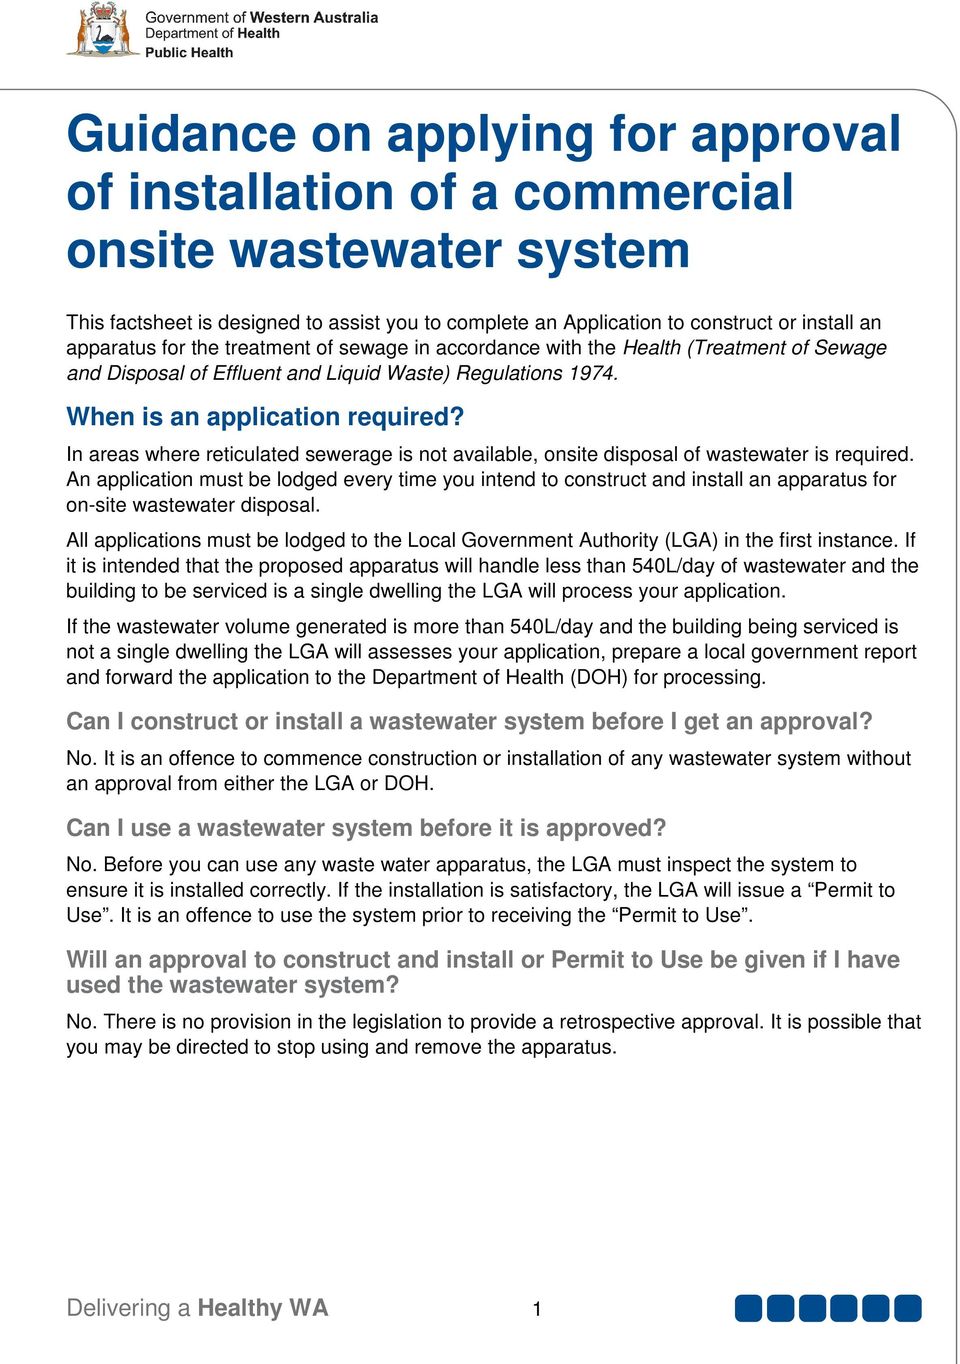 In areas where reticulated sewerage is not available, onsite disposal of wastewater is required.